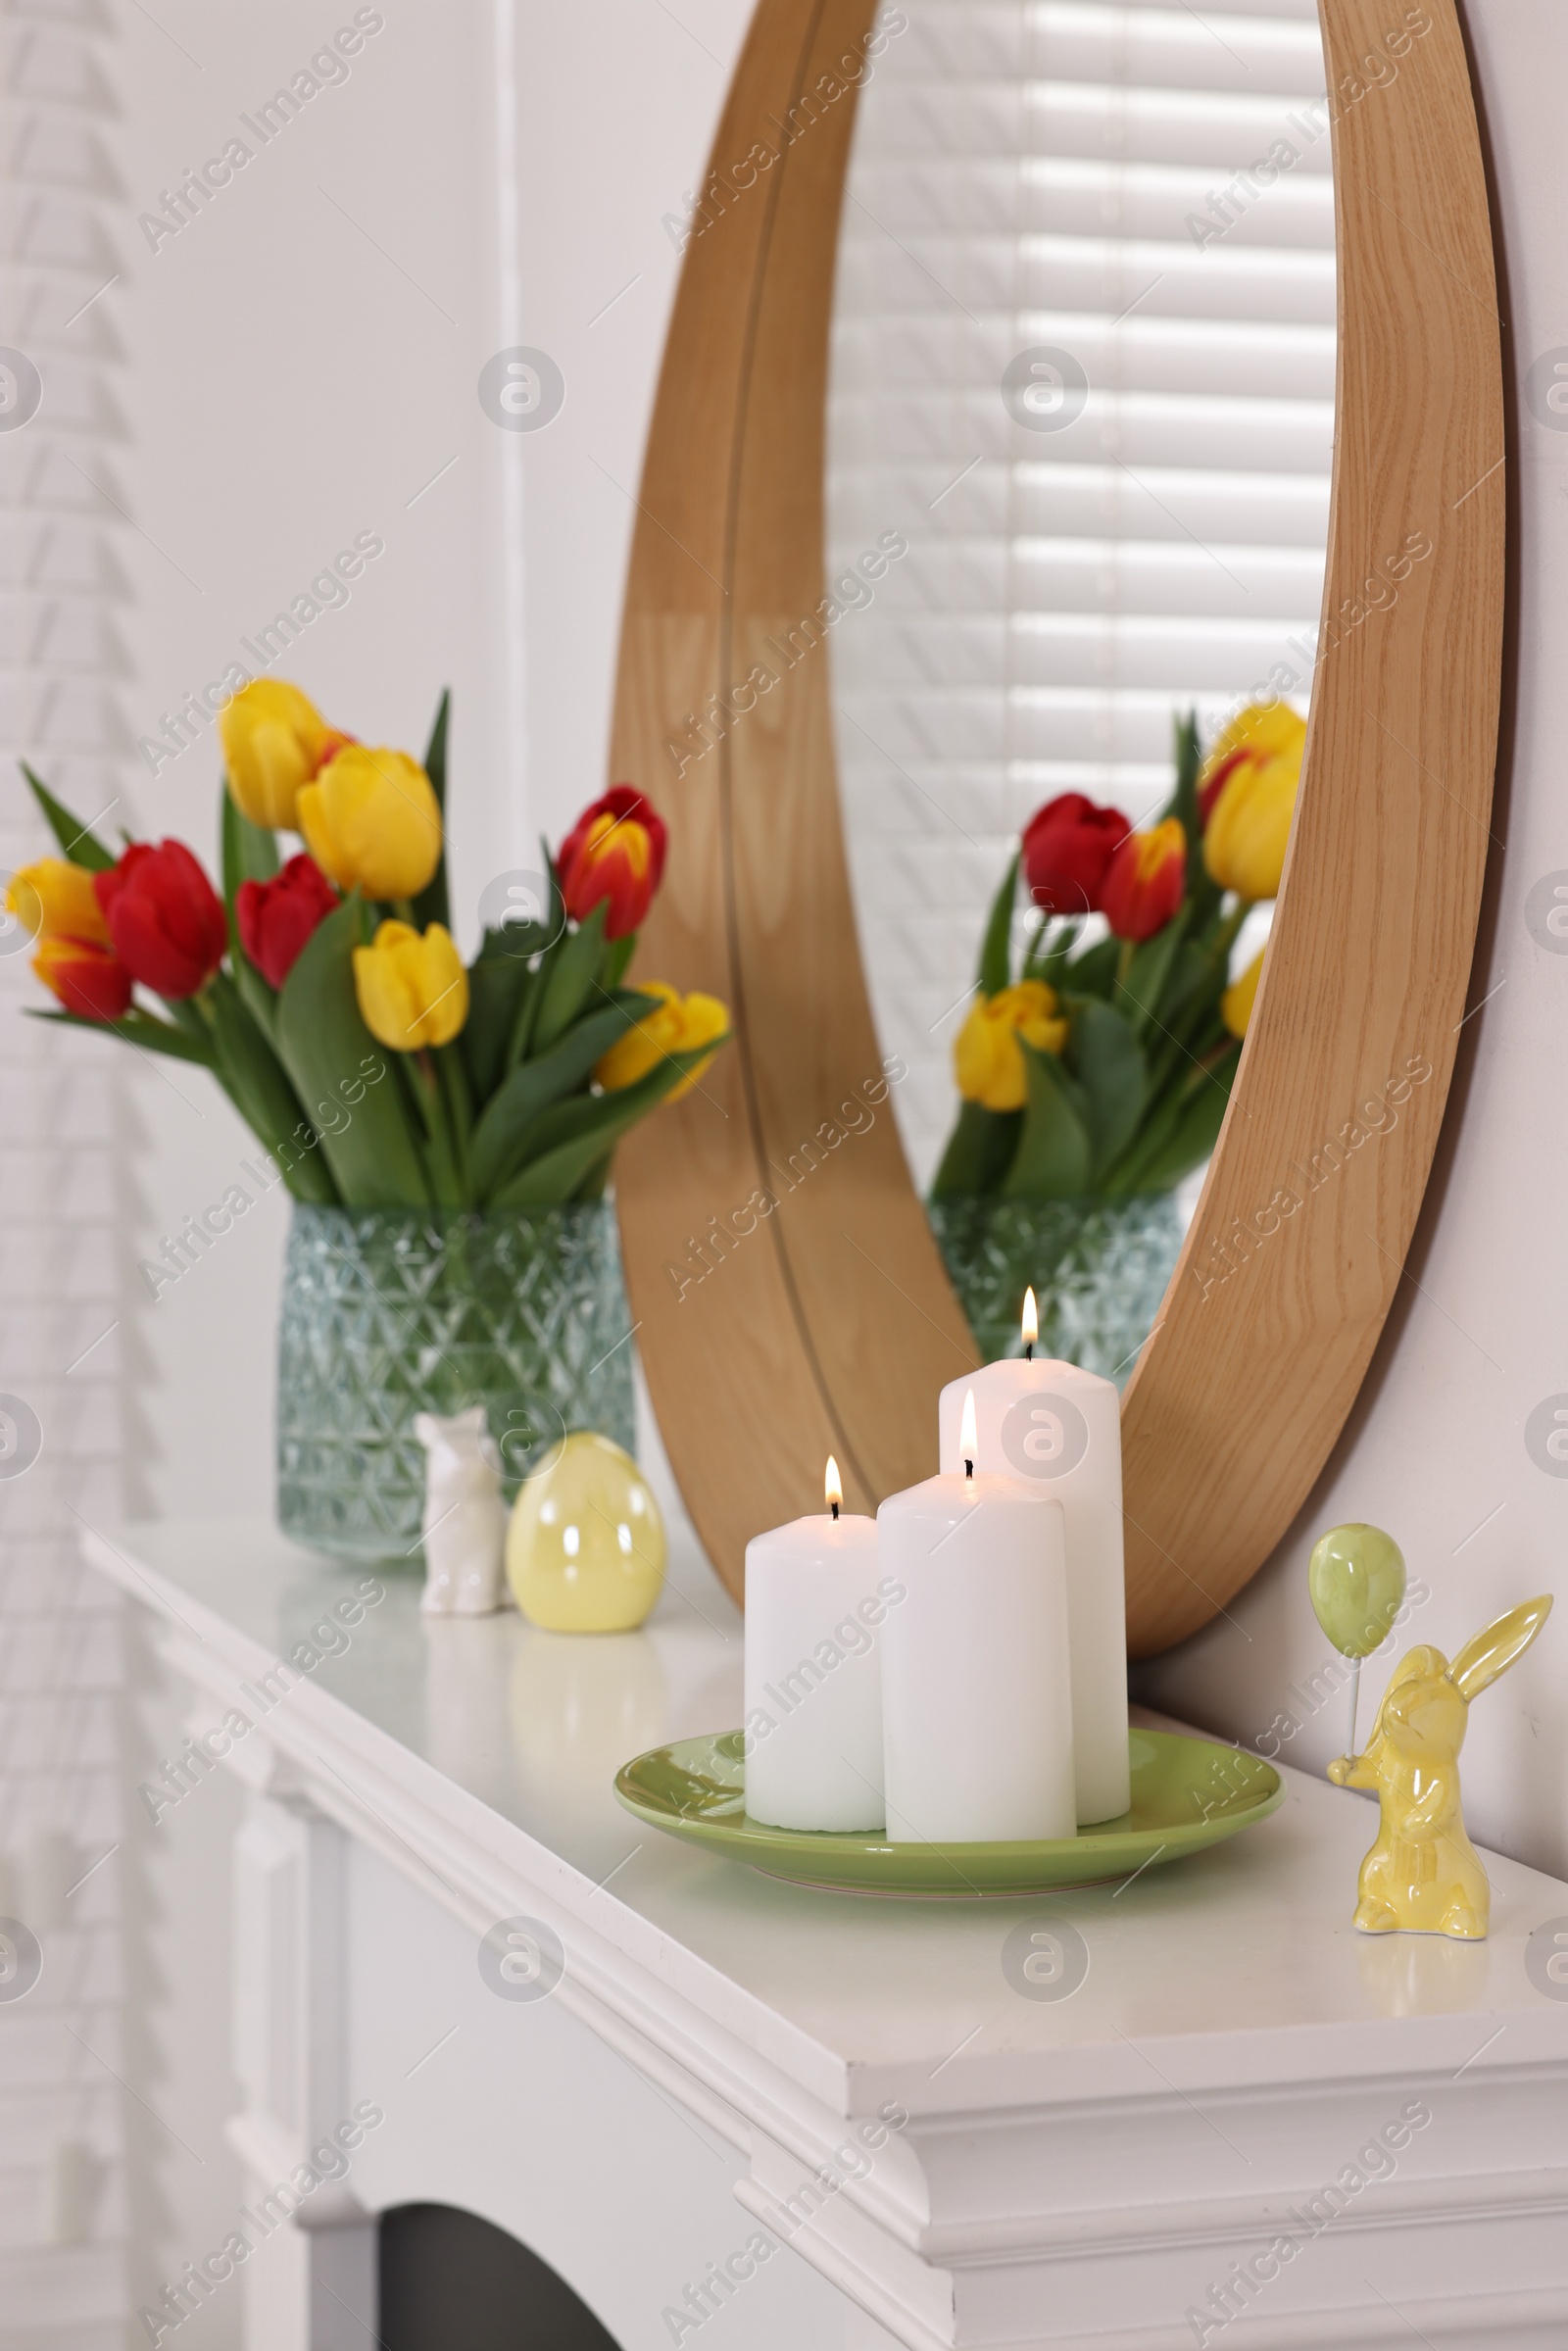 Photo of Easter decorations. Bouquet of tulips in vase, burning candles and figures on fireplace at home